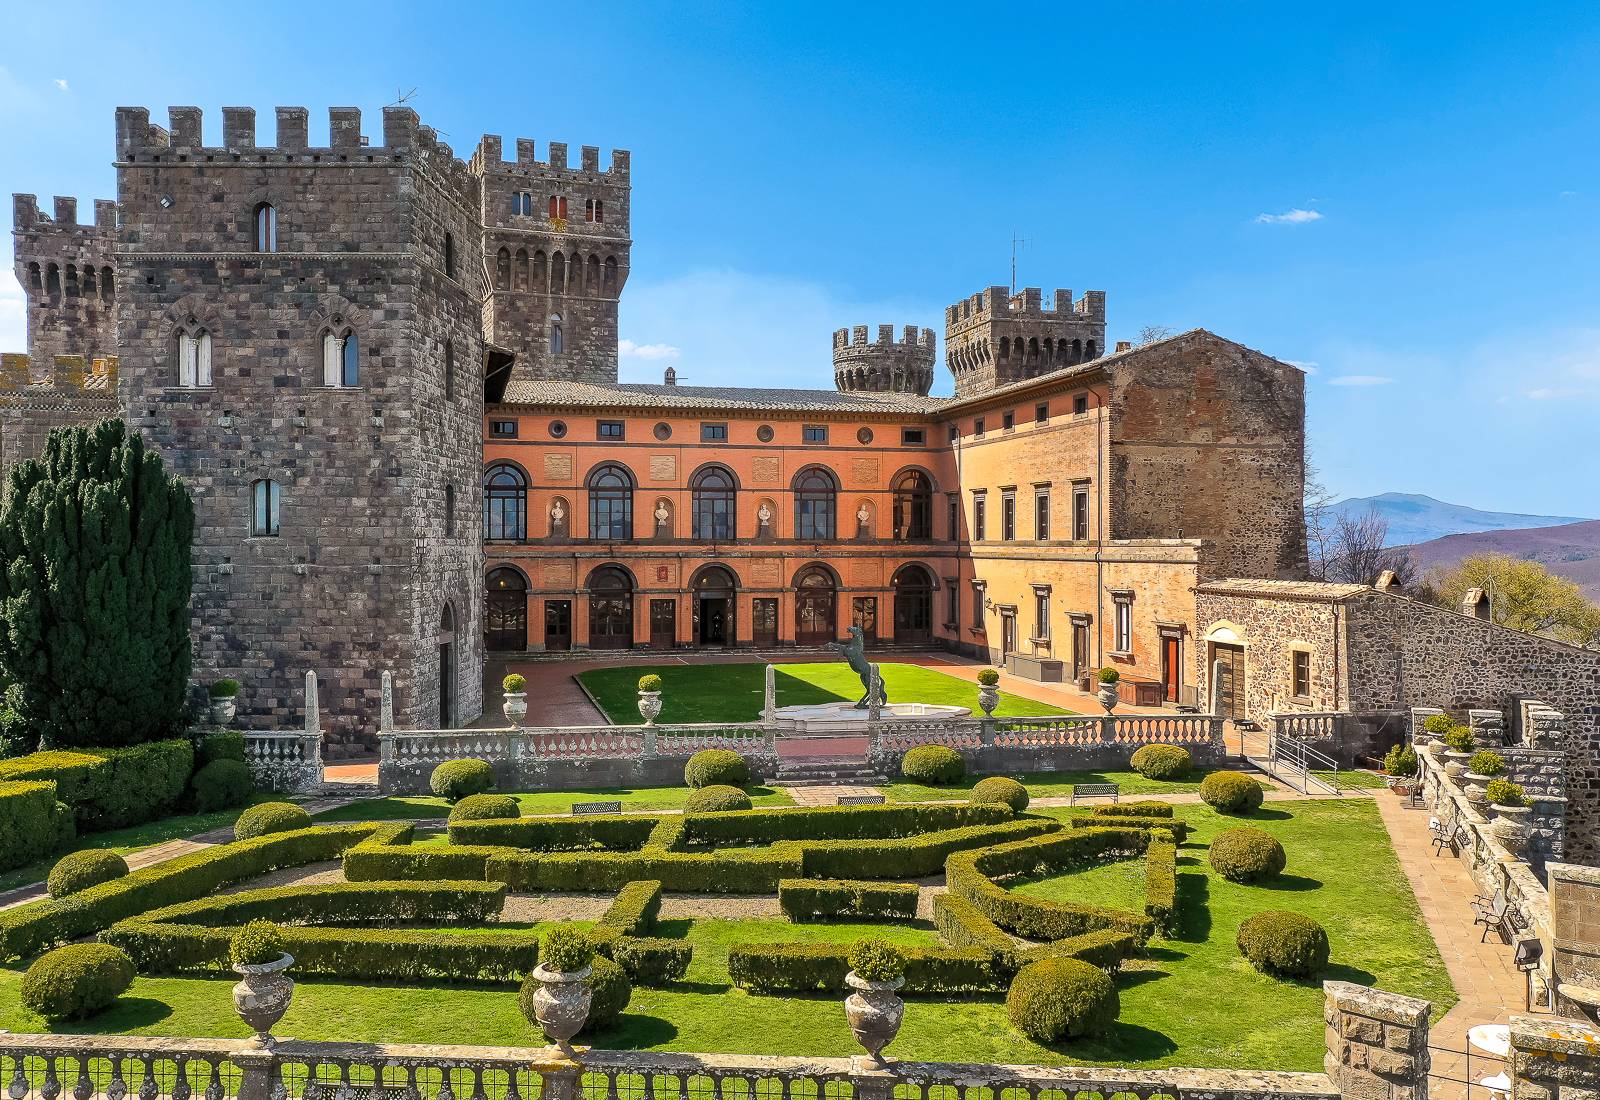 Majestic Renaissance Castle in central Italy